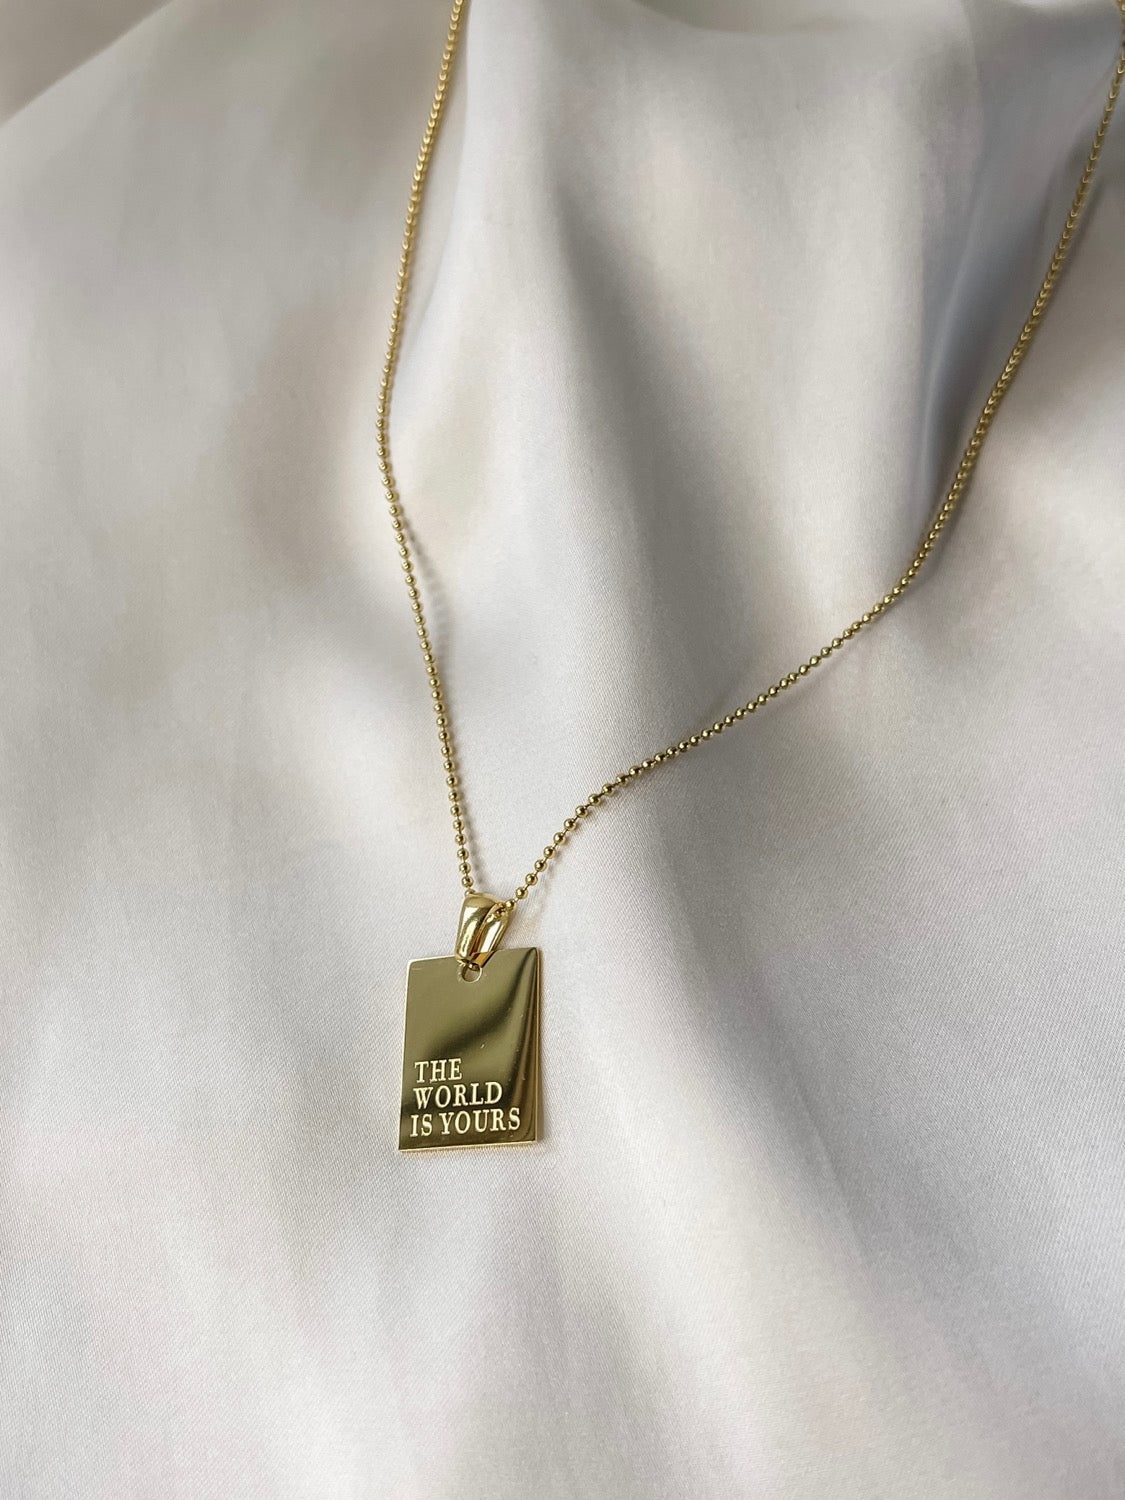 The World is Yours Pendant Necklace